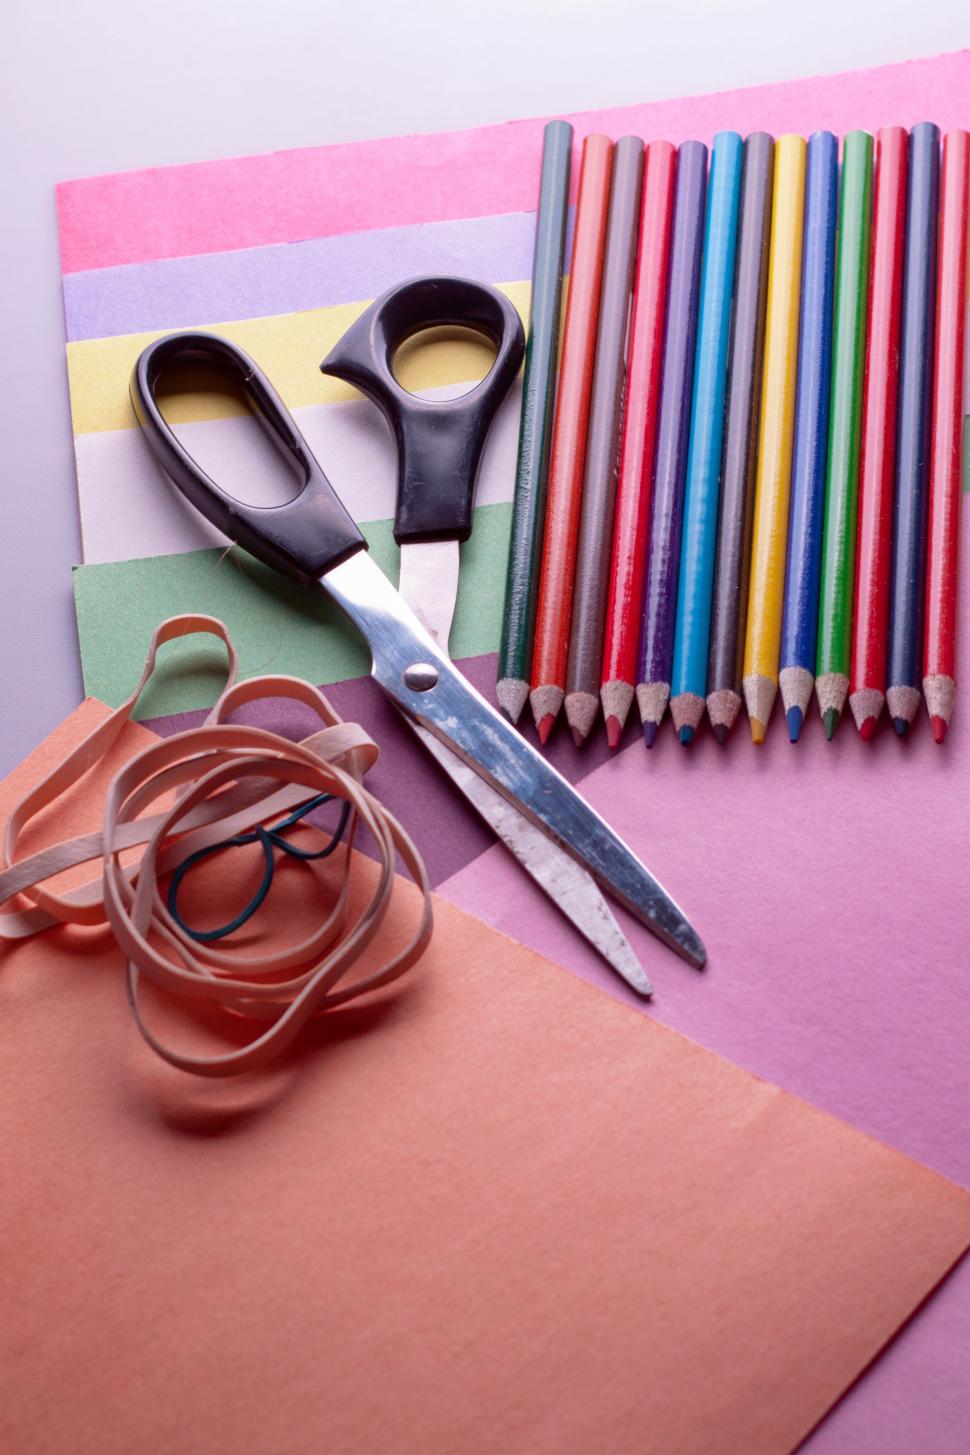 Download Free Stock Photo of Art Supplies 